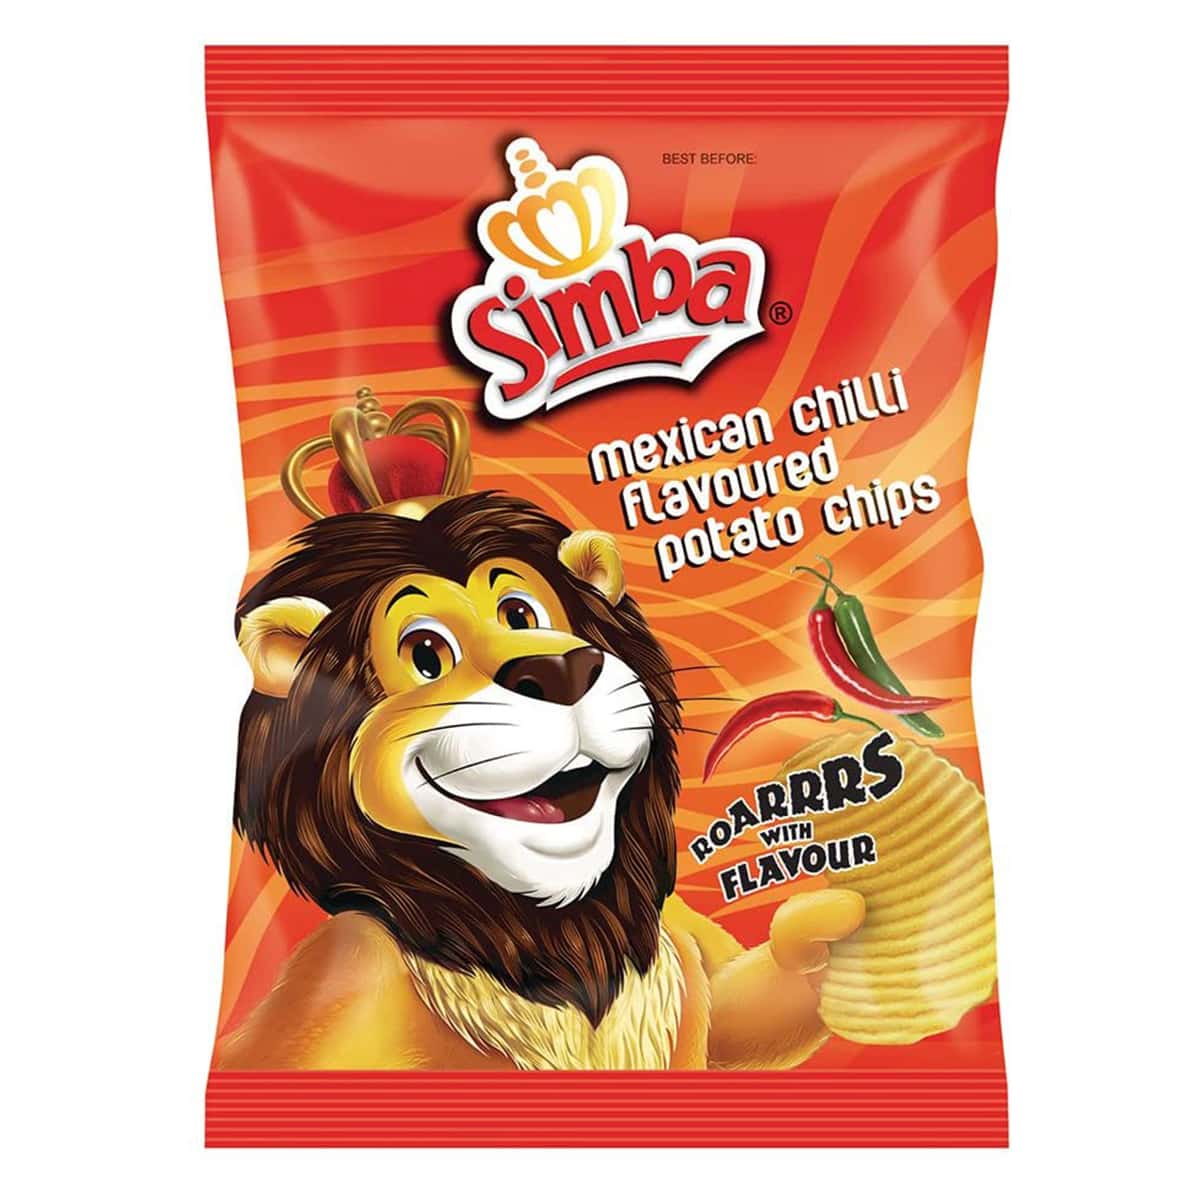 Buy Simba Mexican Chilli Flavoured Potato Chips - 125 gm